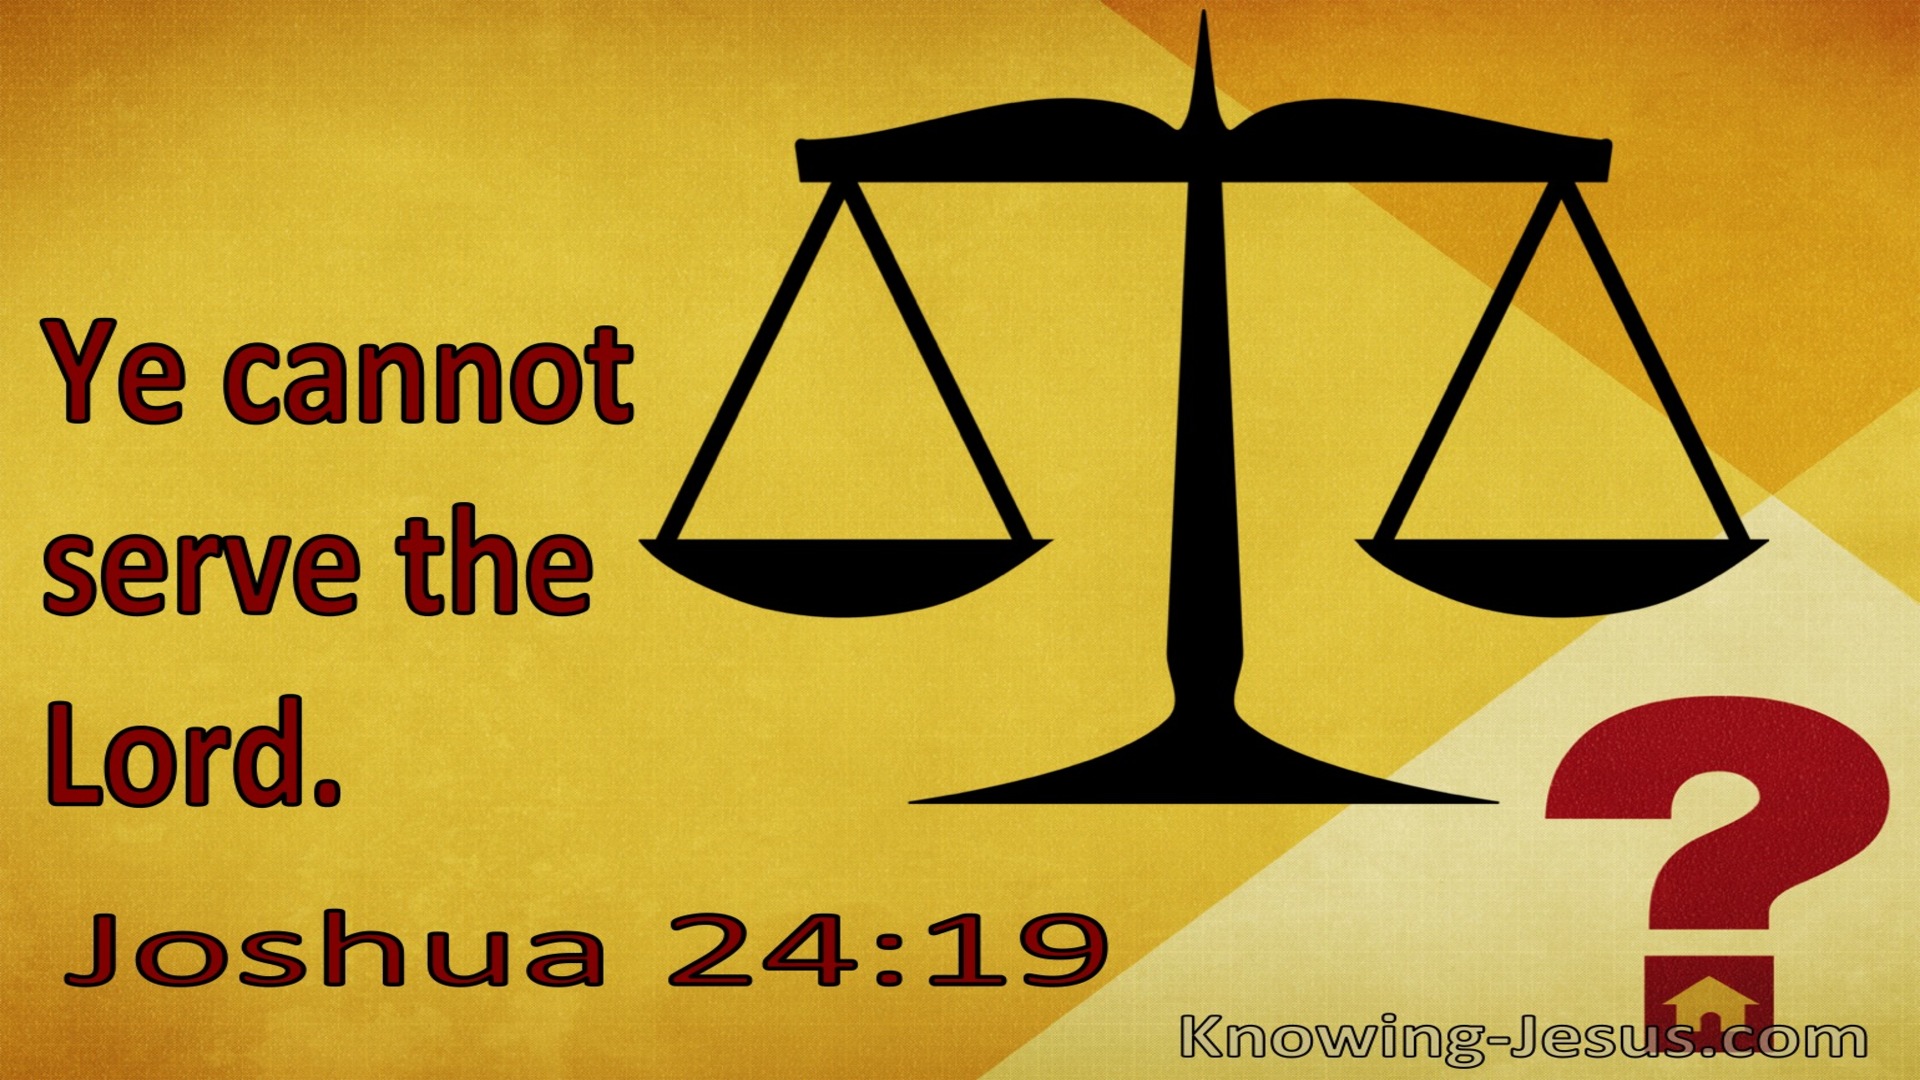 Joshua 24:19 Ye Cannot Serve The Lord (utmost)07:09